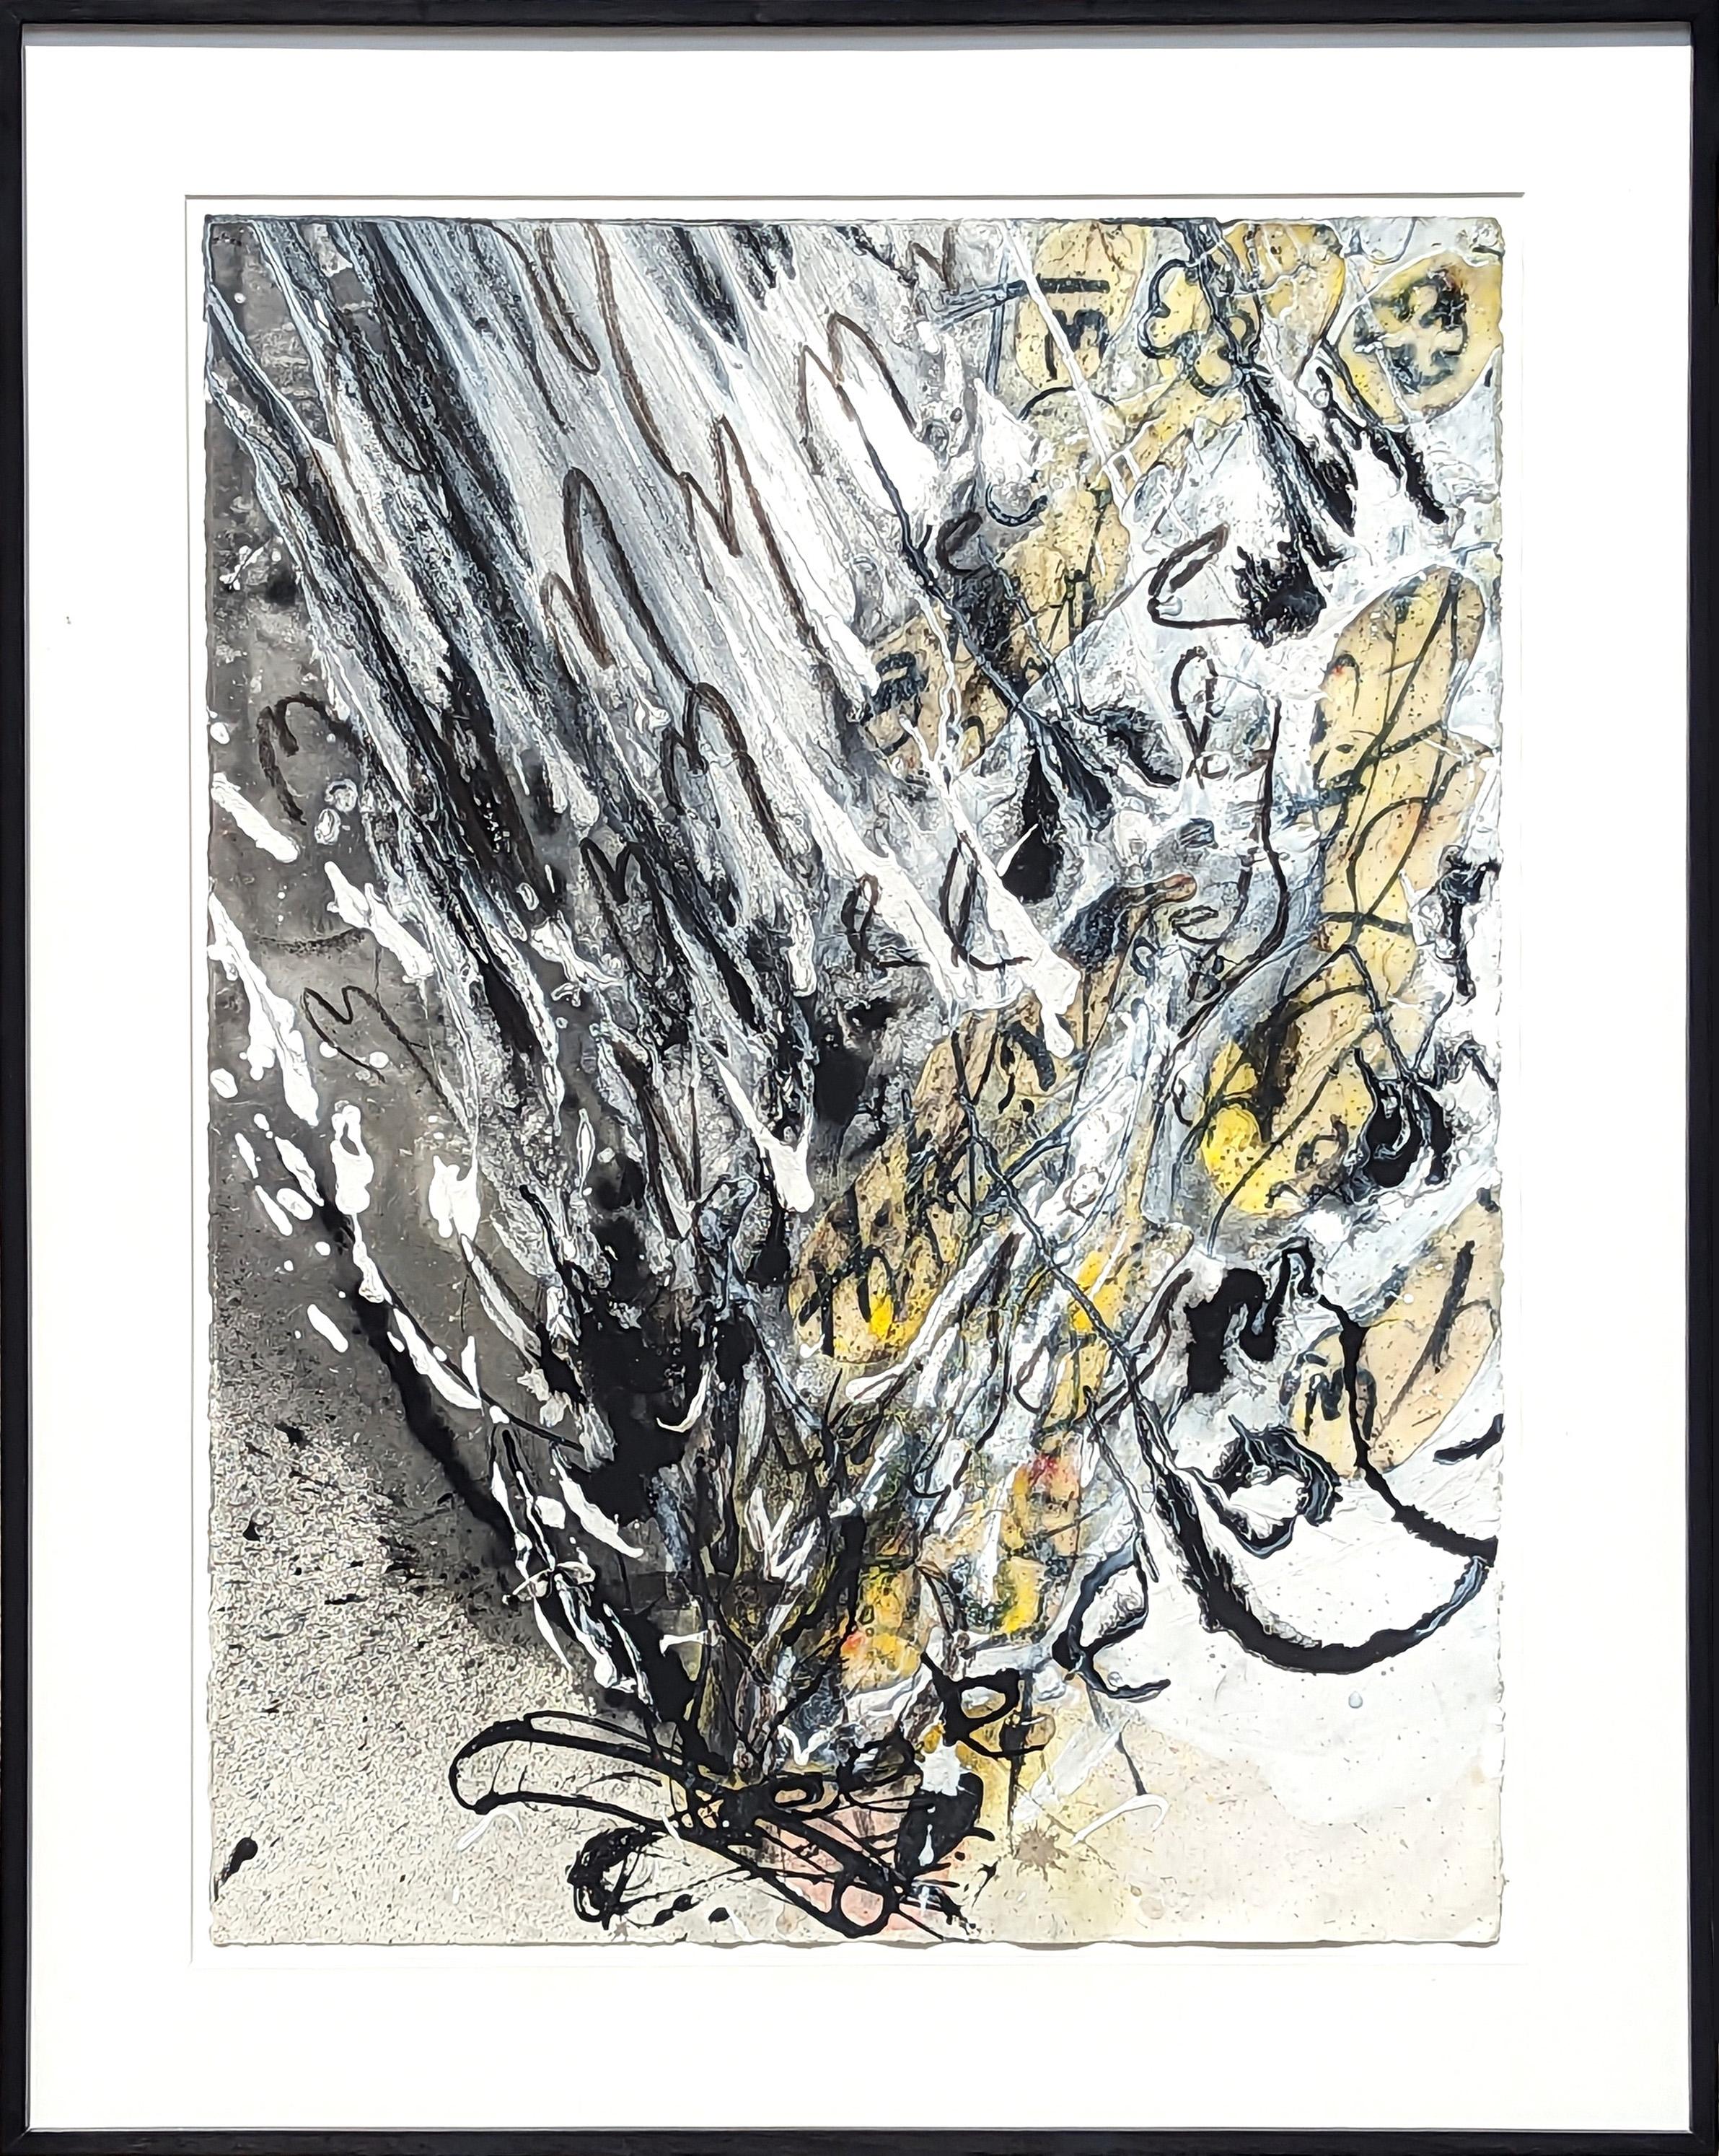 Suzanne McLelland Abstract Painting - "Them" Contemporary Black, White, and Yellow Abstract Expressionist Painting